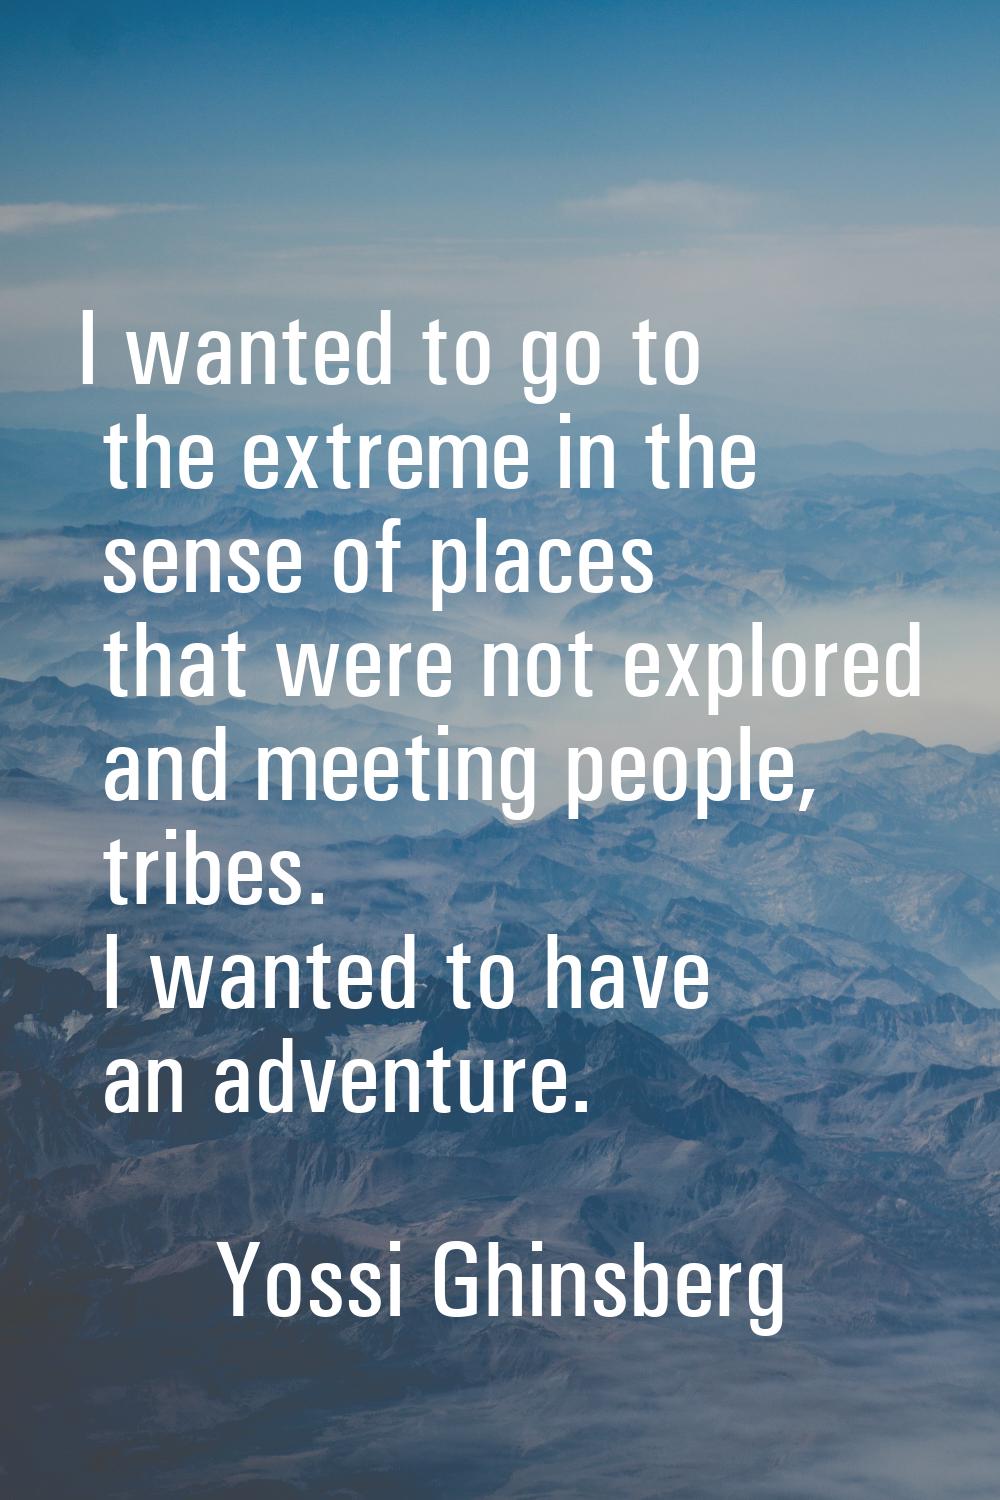 I wanted to go to the extreme in the sense of places that were not explored and meeting people, tri